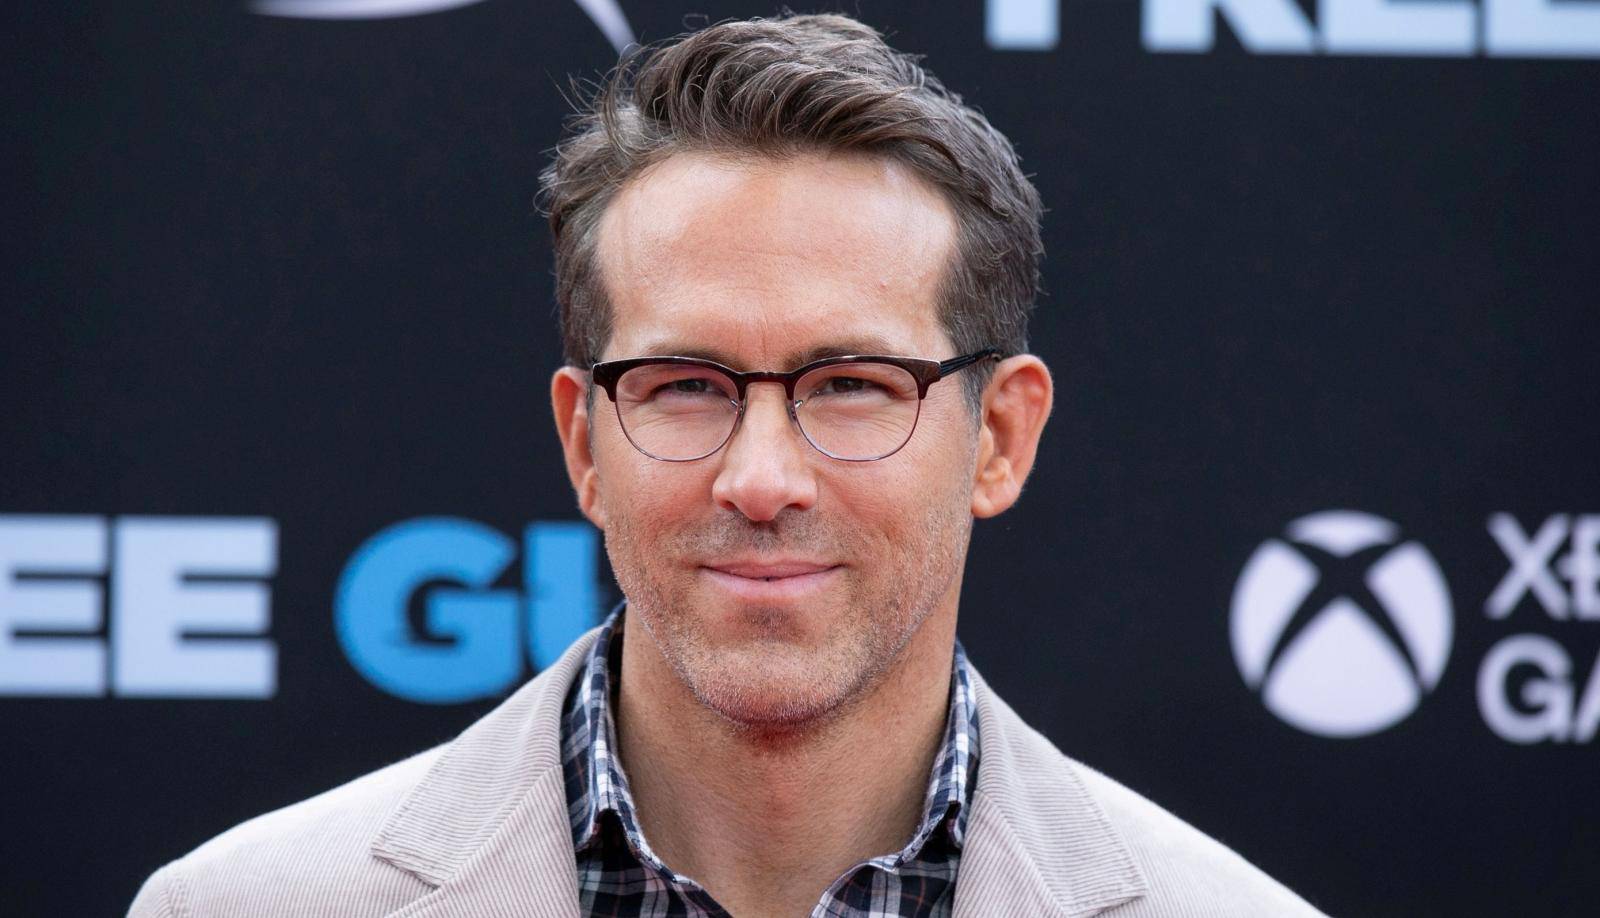 FILE PHOTO: Actor Ryan Reynolds poses at the premiere for the film "Free Guy" in New York